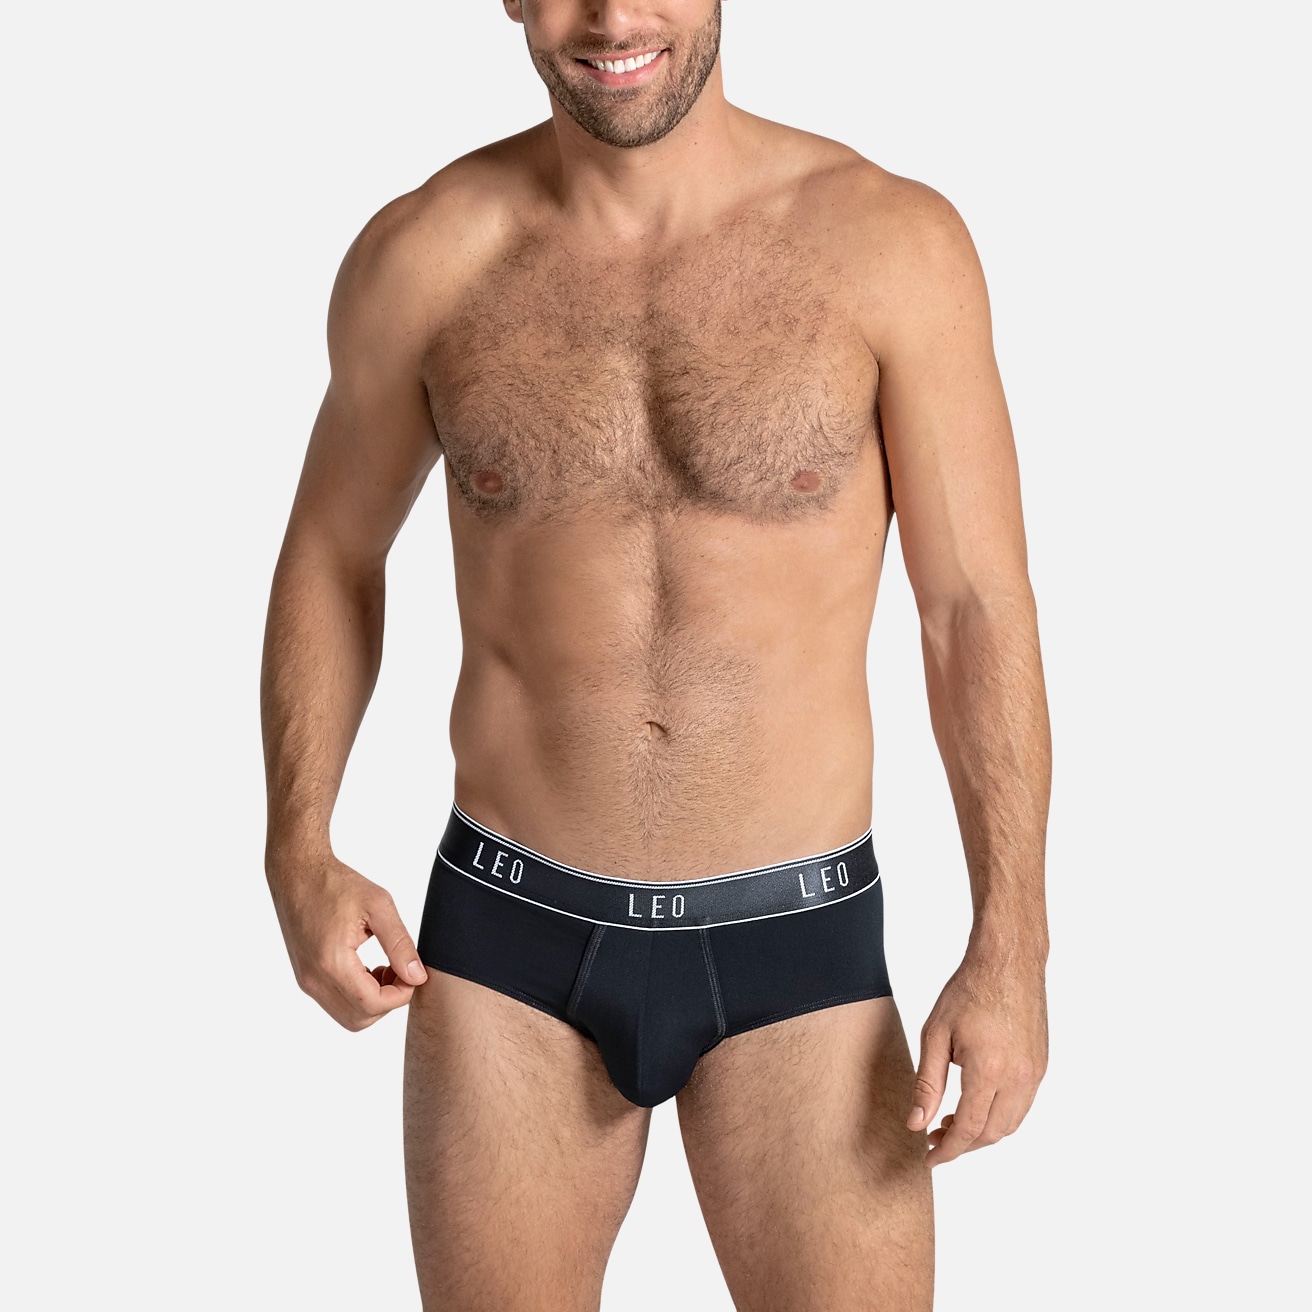 https://image.menswearhouse.com/is/image/TMW/TMW_8YGE_02_LEO_BY_LEONISA_UNDERWEAR_BLACK_MAIN?imPolicy=pdp-mob-2x